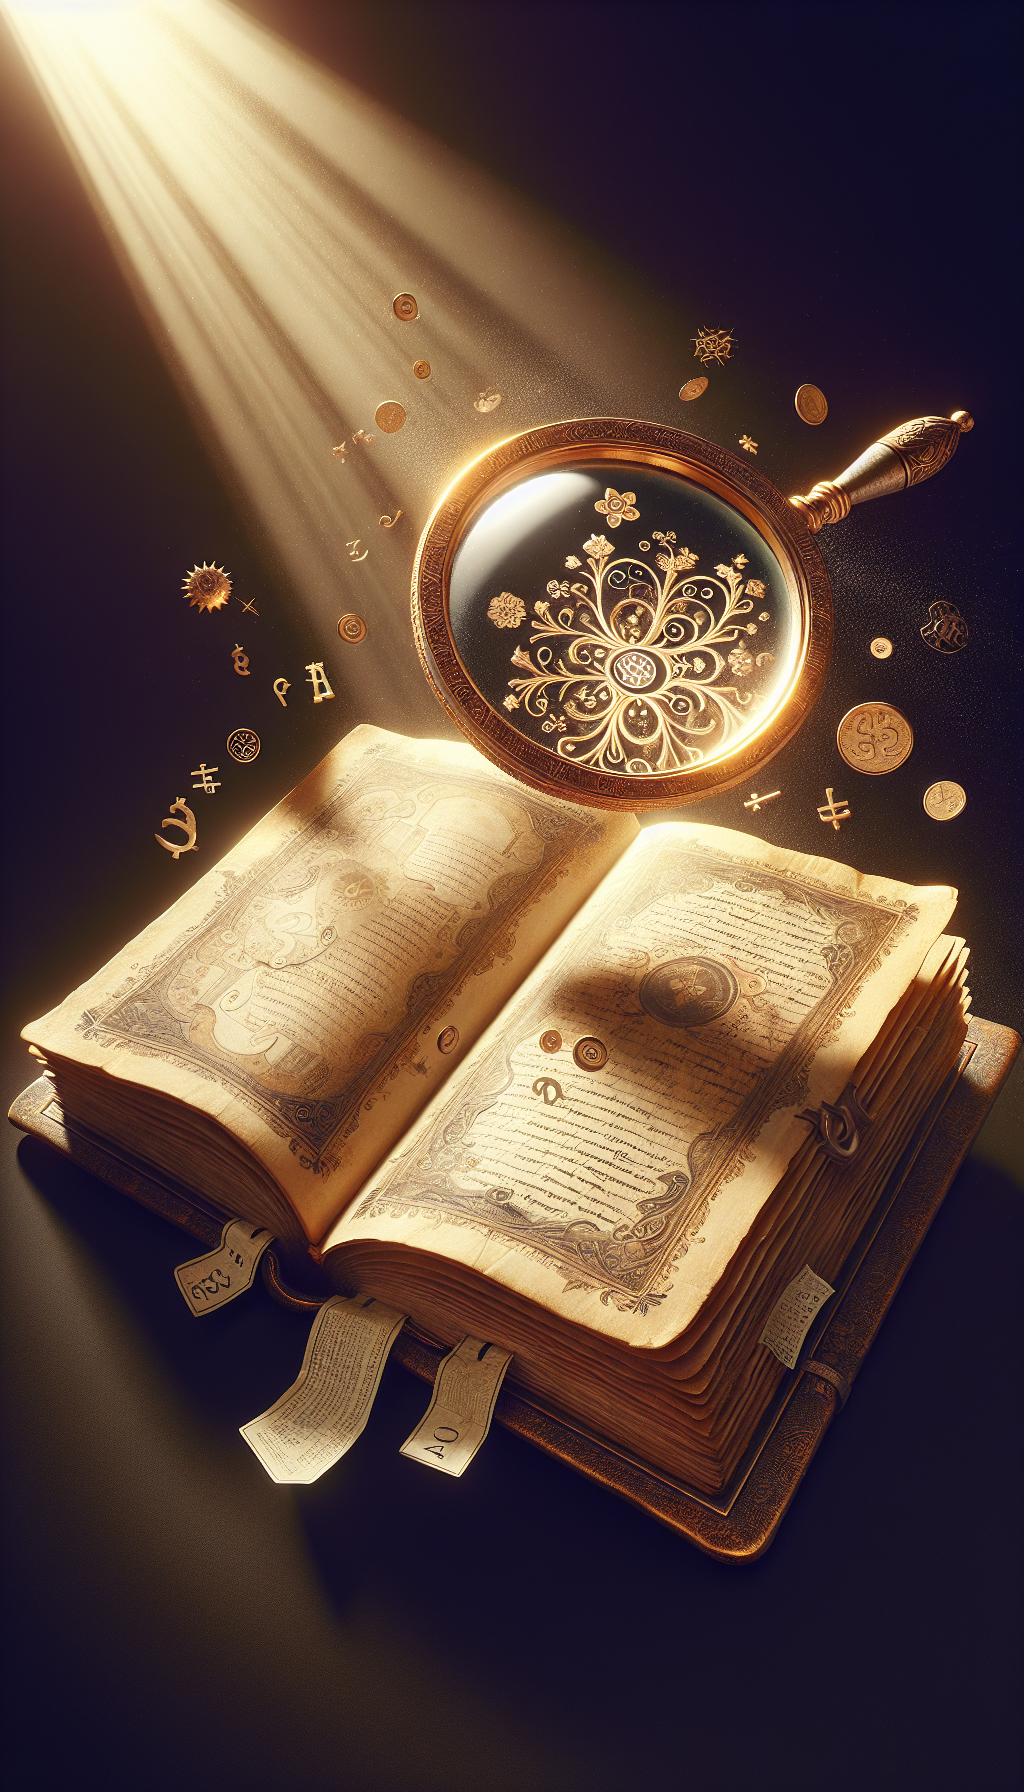 A magnifying glass hovers over a whimsical open book with golden, ornate pages, revealing hidden symbols and price tags amidst the dust particles dancing in a beam of light. The book radiates a mysterious glow, suggesting the hidden value within, while archaic fonts and currency symbols float around, signifying the art of valuation in antique book collecting.